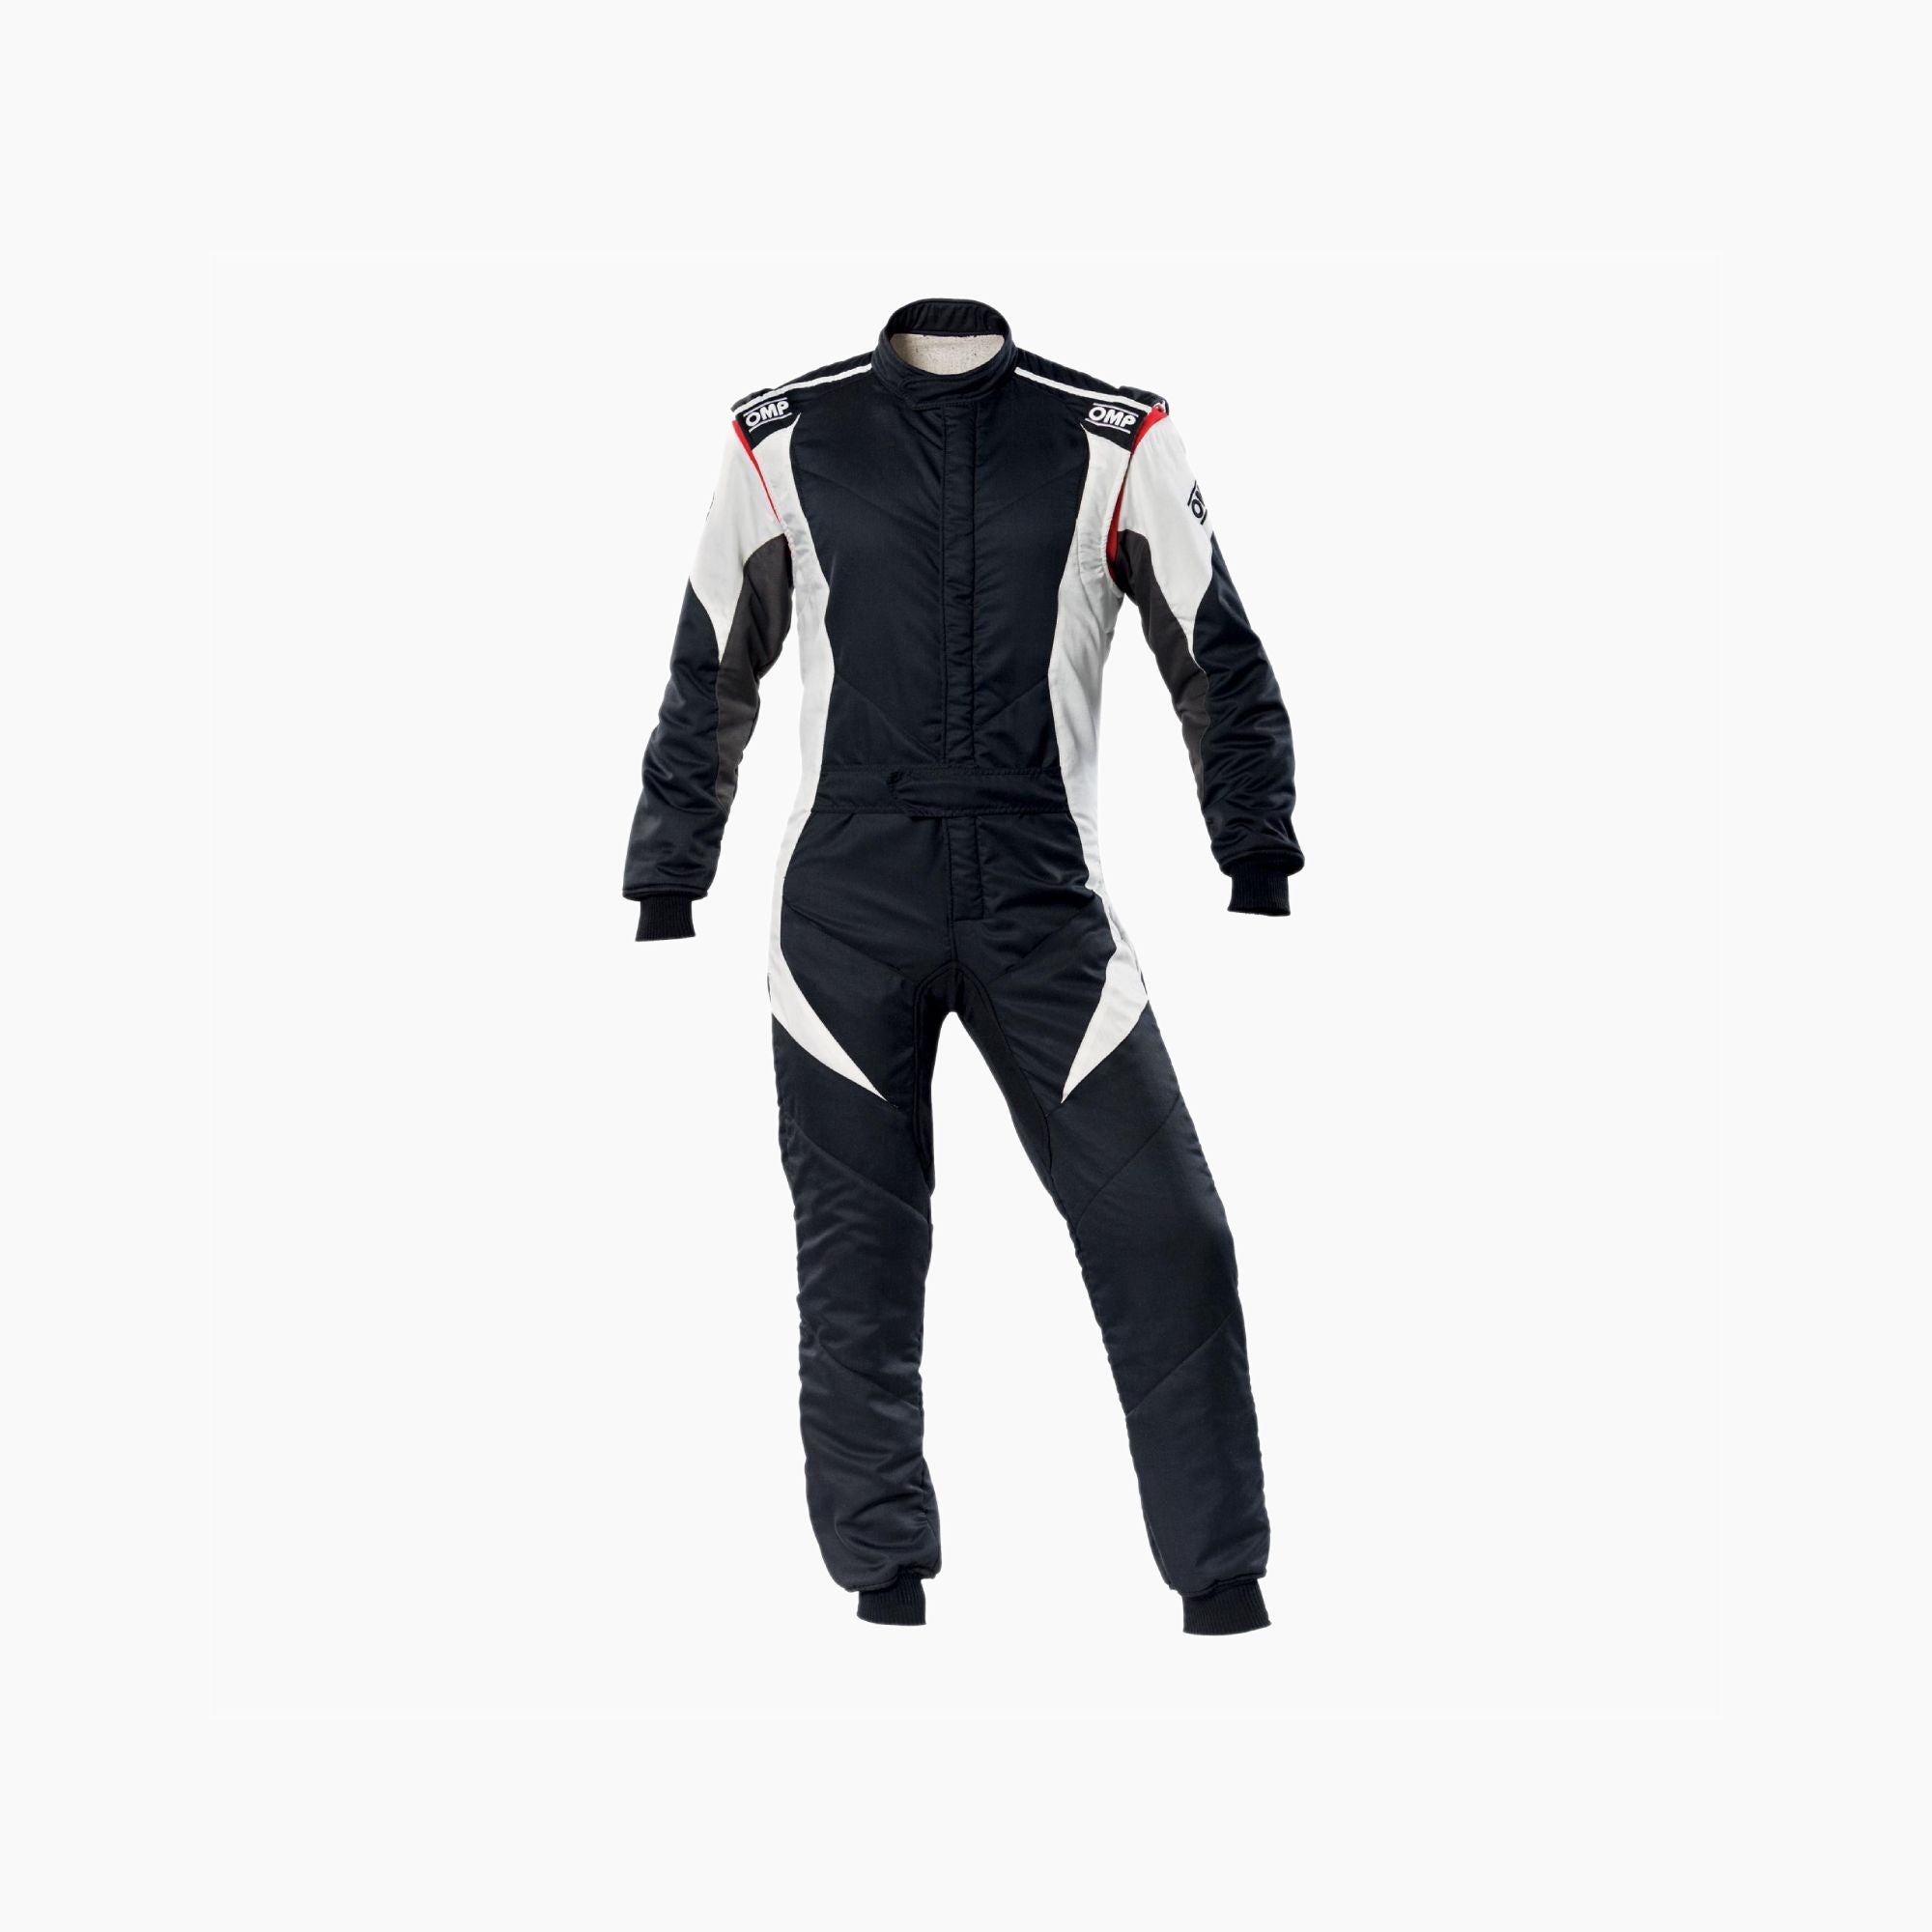 OMP | FIRST EVO Racing Suit-Racing Suit-OMP-gpx-store